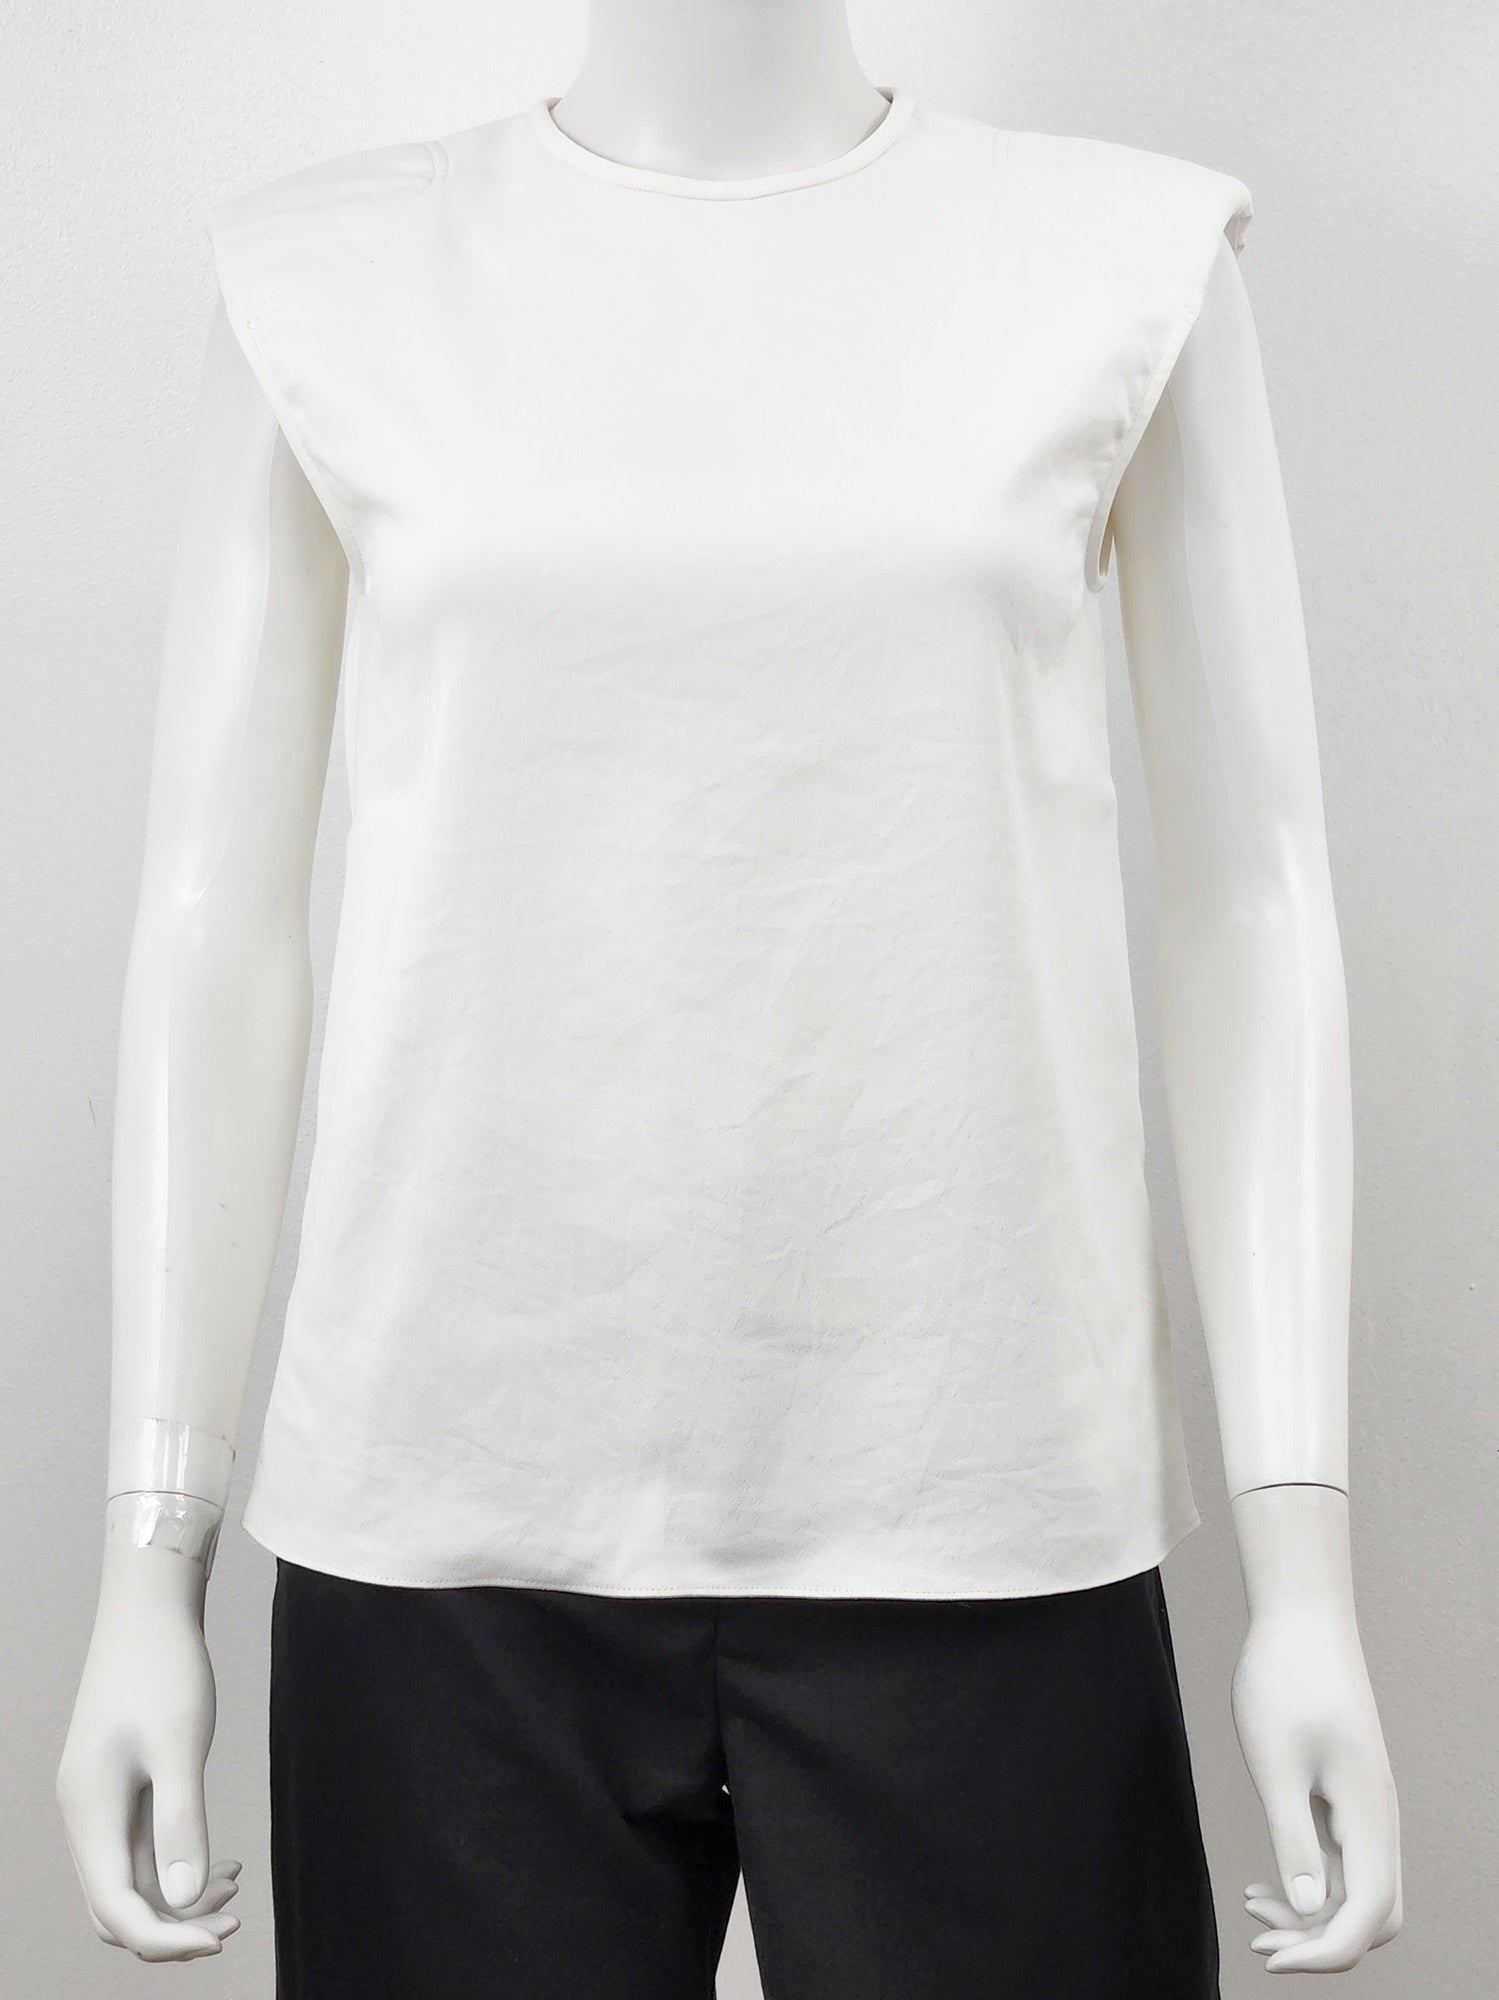 Chalky Drape Padded Top Size XS